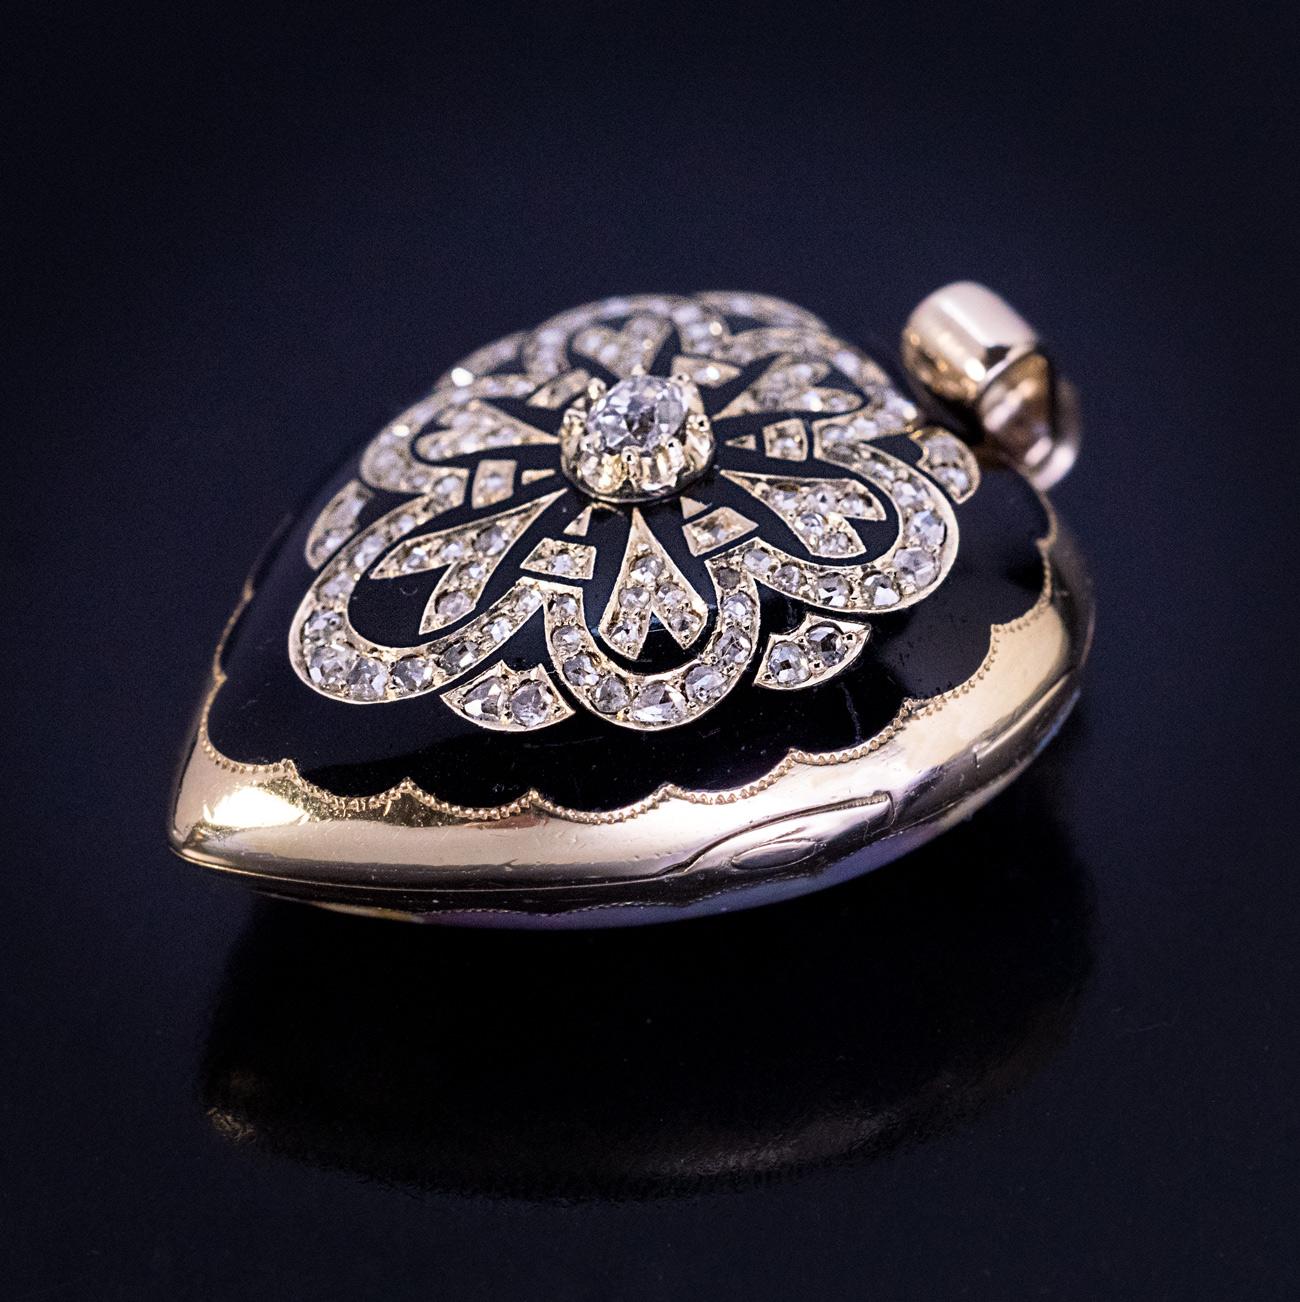 Likely made in Geneva, Switzerland, circa 1850.

A superb quality antique Victorian era 18K gold, heart-shaped locket pendant features a finely painted enamel profile of a female wearing a gold royal diadem, accented by rose cut diamonds.

The